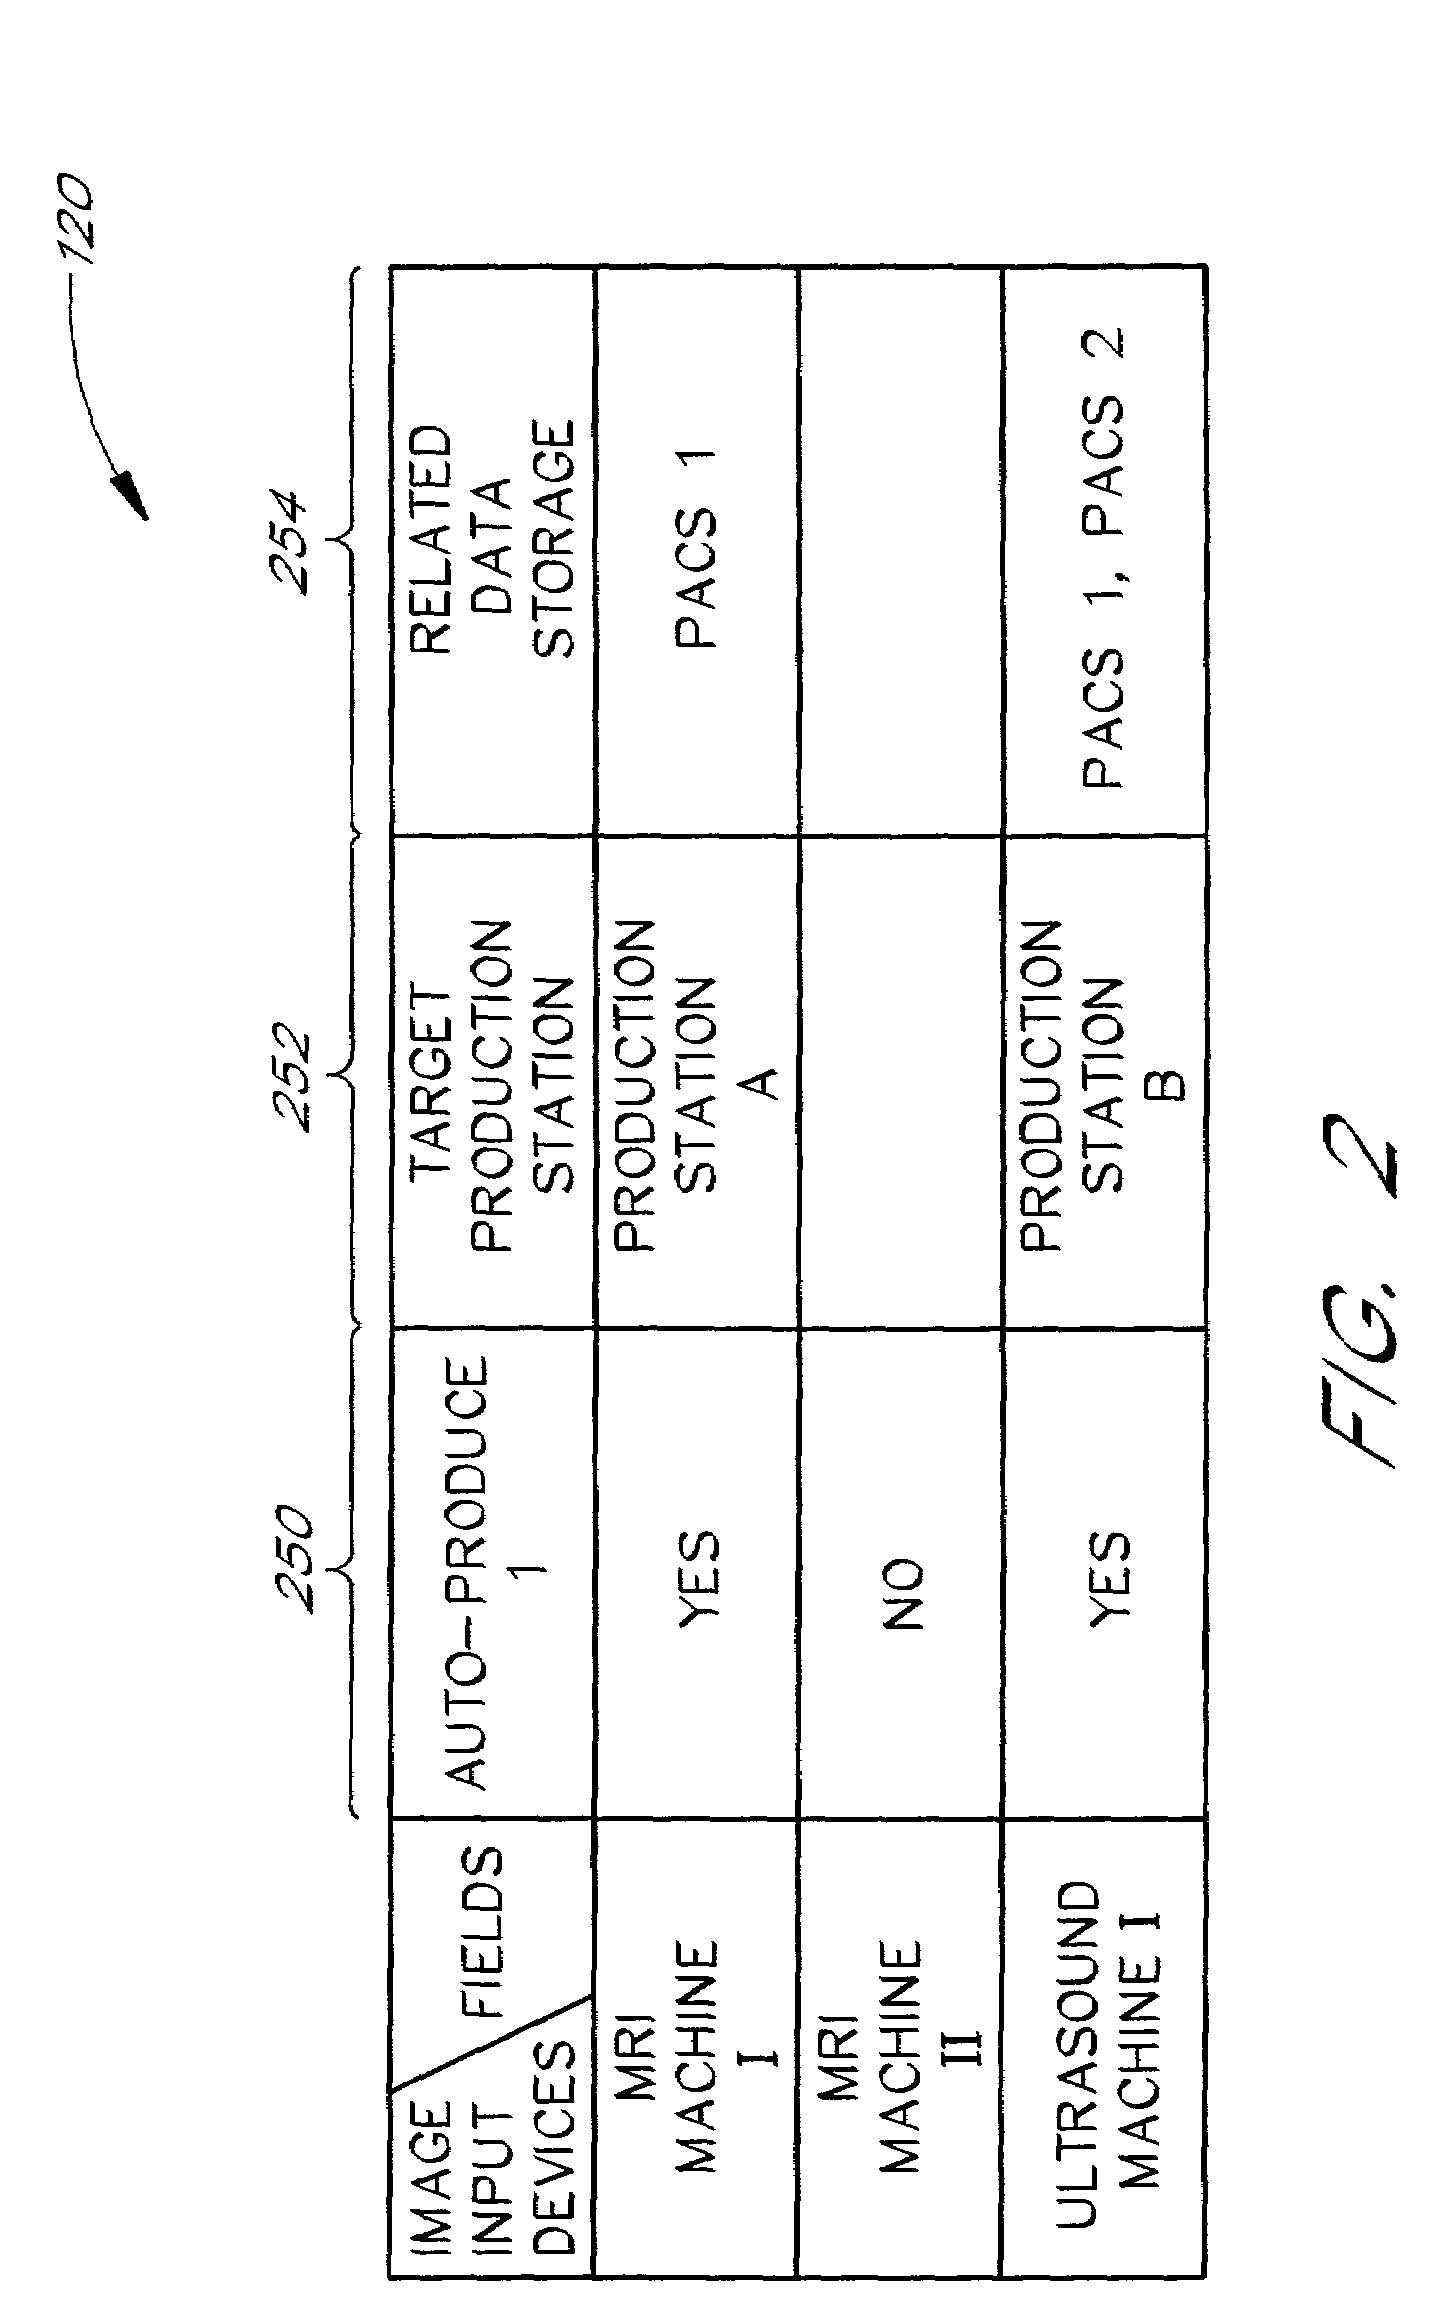 System and method for producing medical image data onto portable digital recording media